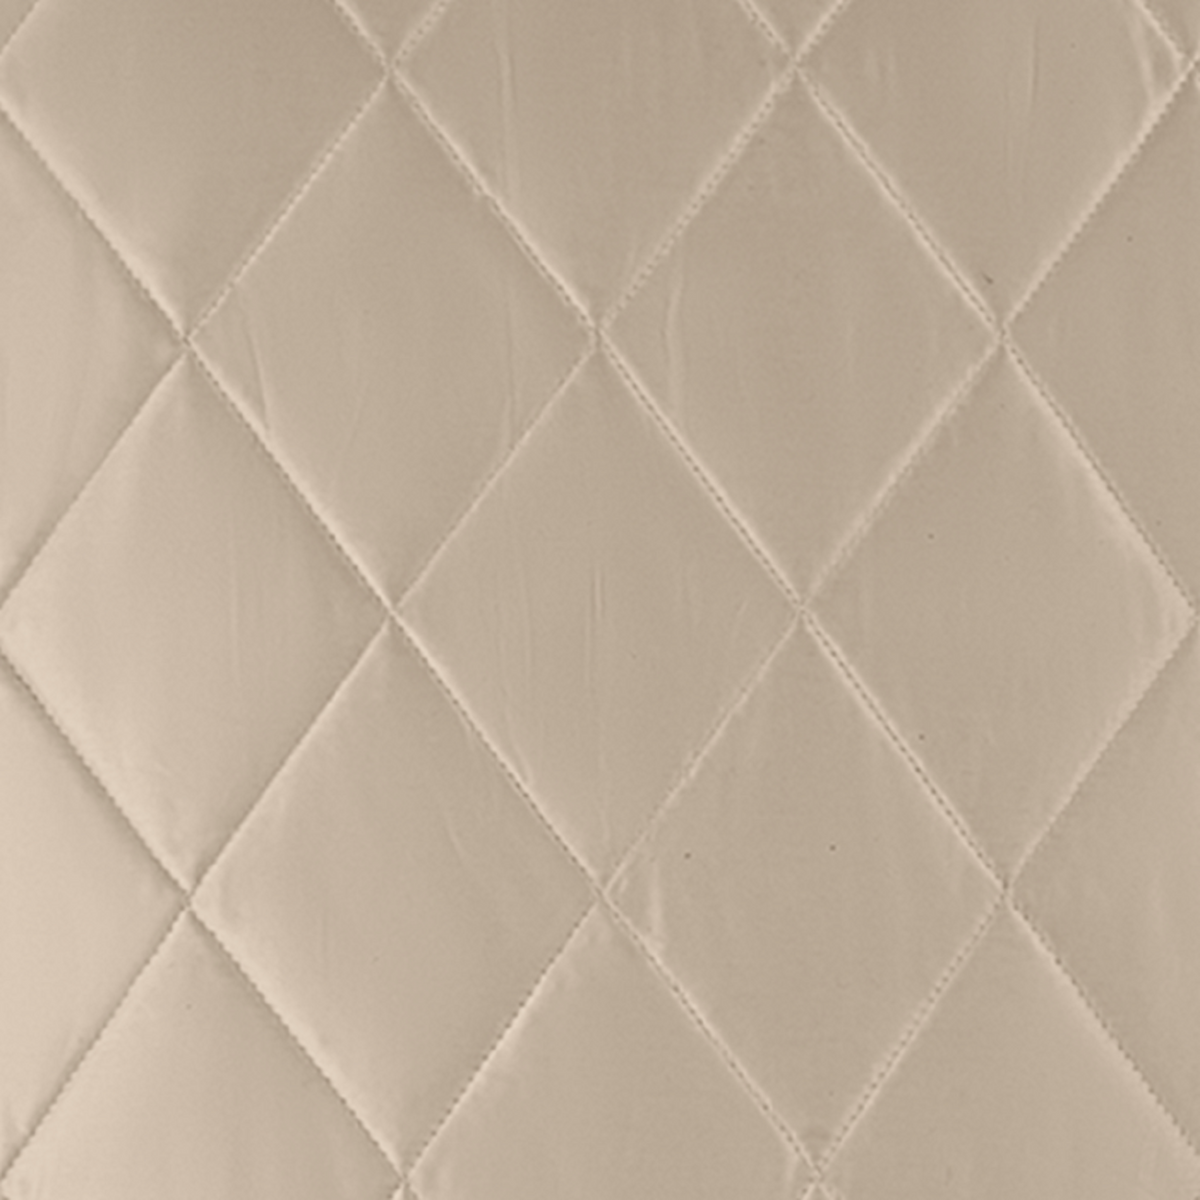 Detail Closeup of Matouk Nocturne Quilted Bedding Swatch in Khaki